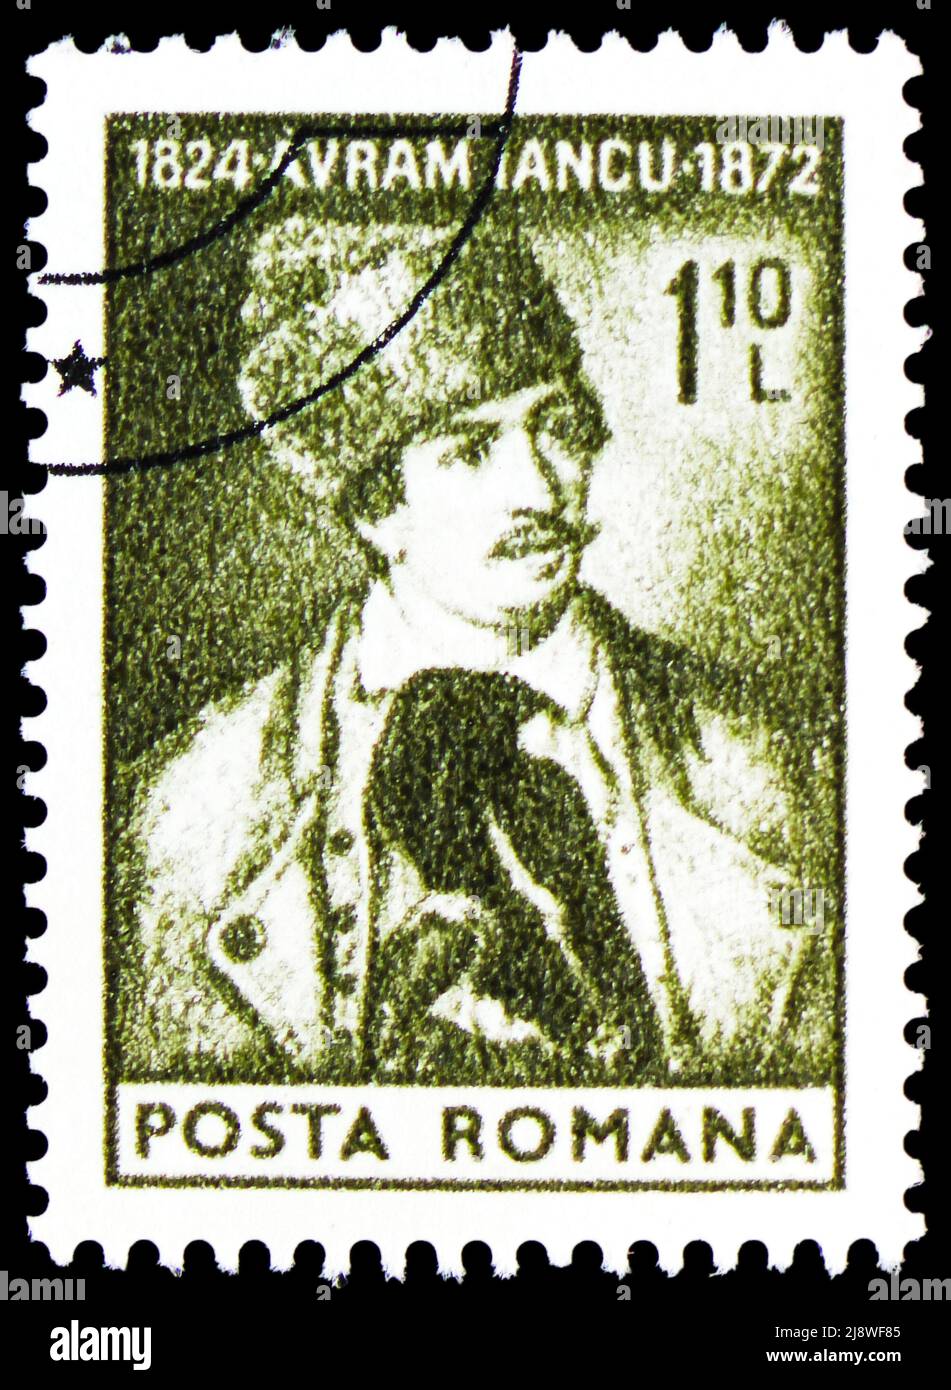 MOSCOW, RUSSIA - MAY 14, 2022: Postage stamp printed in Romania shows Avram Iancu (1824-1872) revolutionary, Cultural Anniversaries 1974 serie, circa Stock Photo